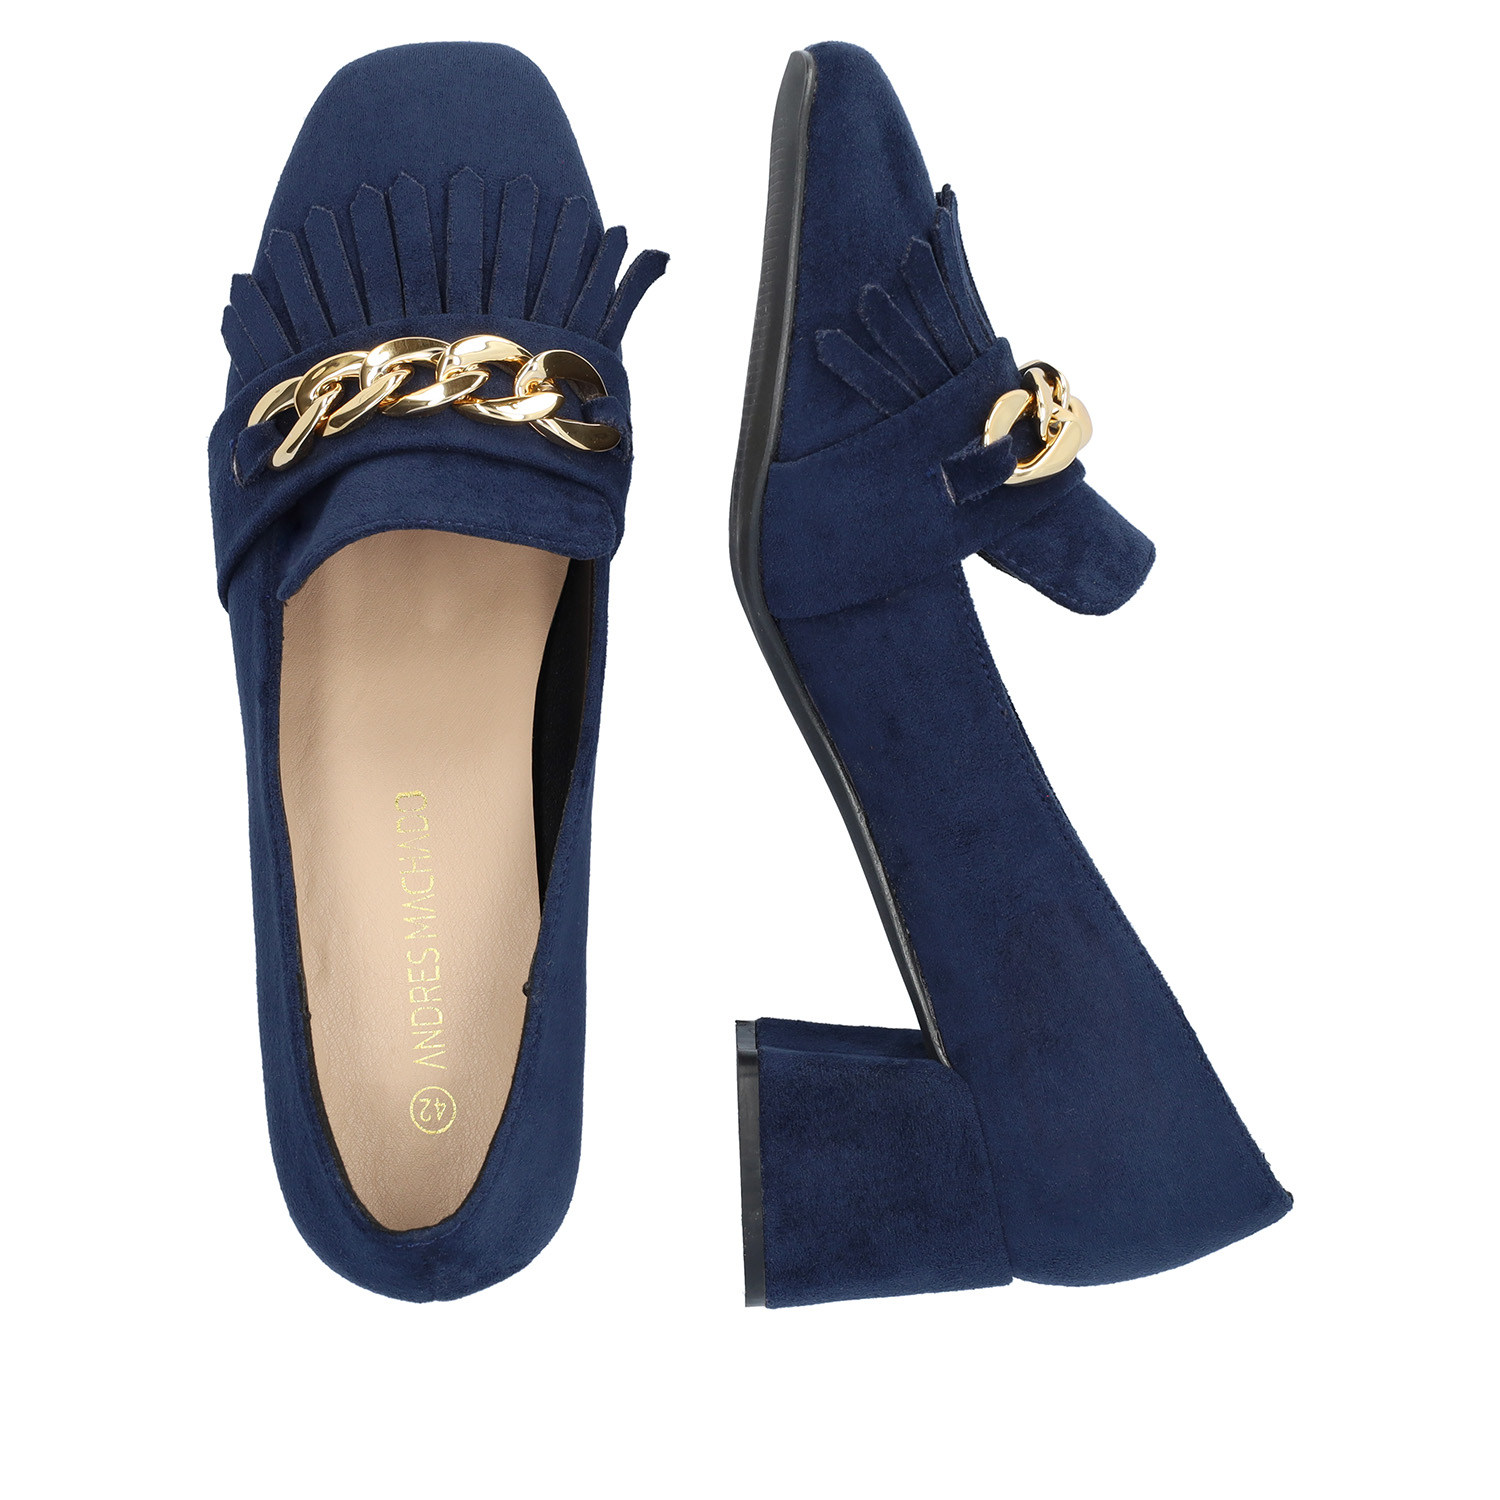 Heeled moccasin in navy coloured faux suede 